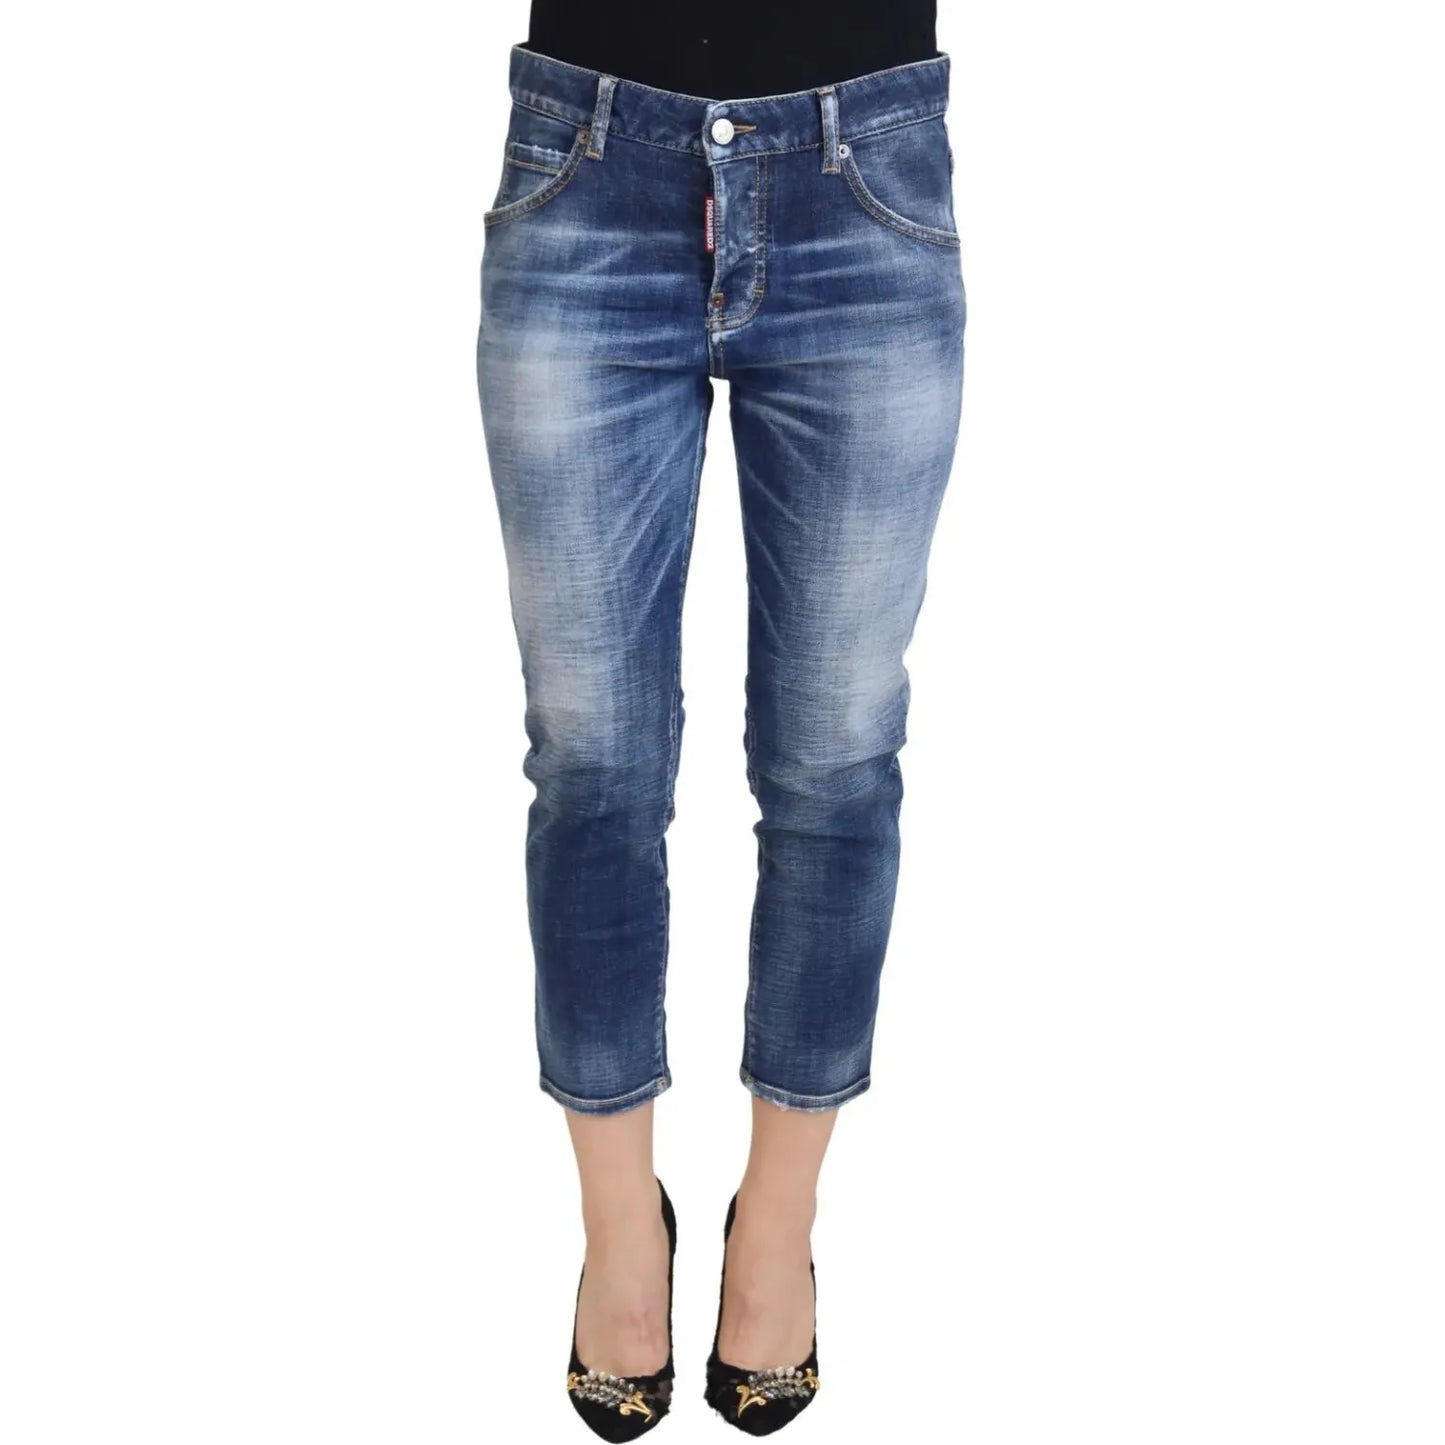 Dsquared² Blue Cotton Mid Waist Cropped Denim Jeans Cool Girl blue-cotton-mid-waist-cropped-denim-jeans-cool-girl